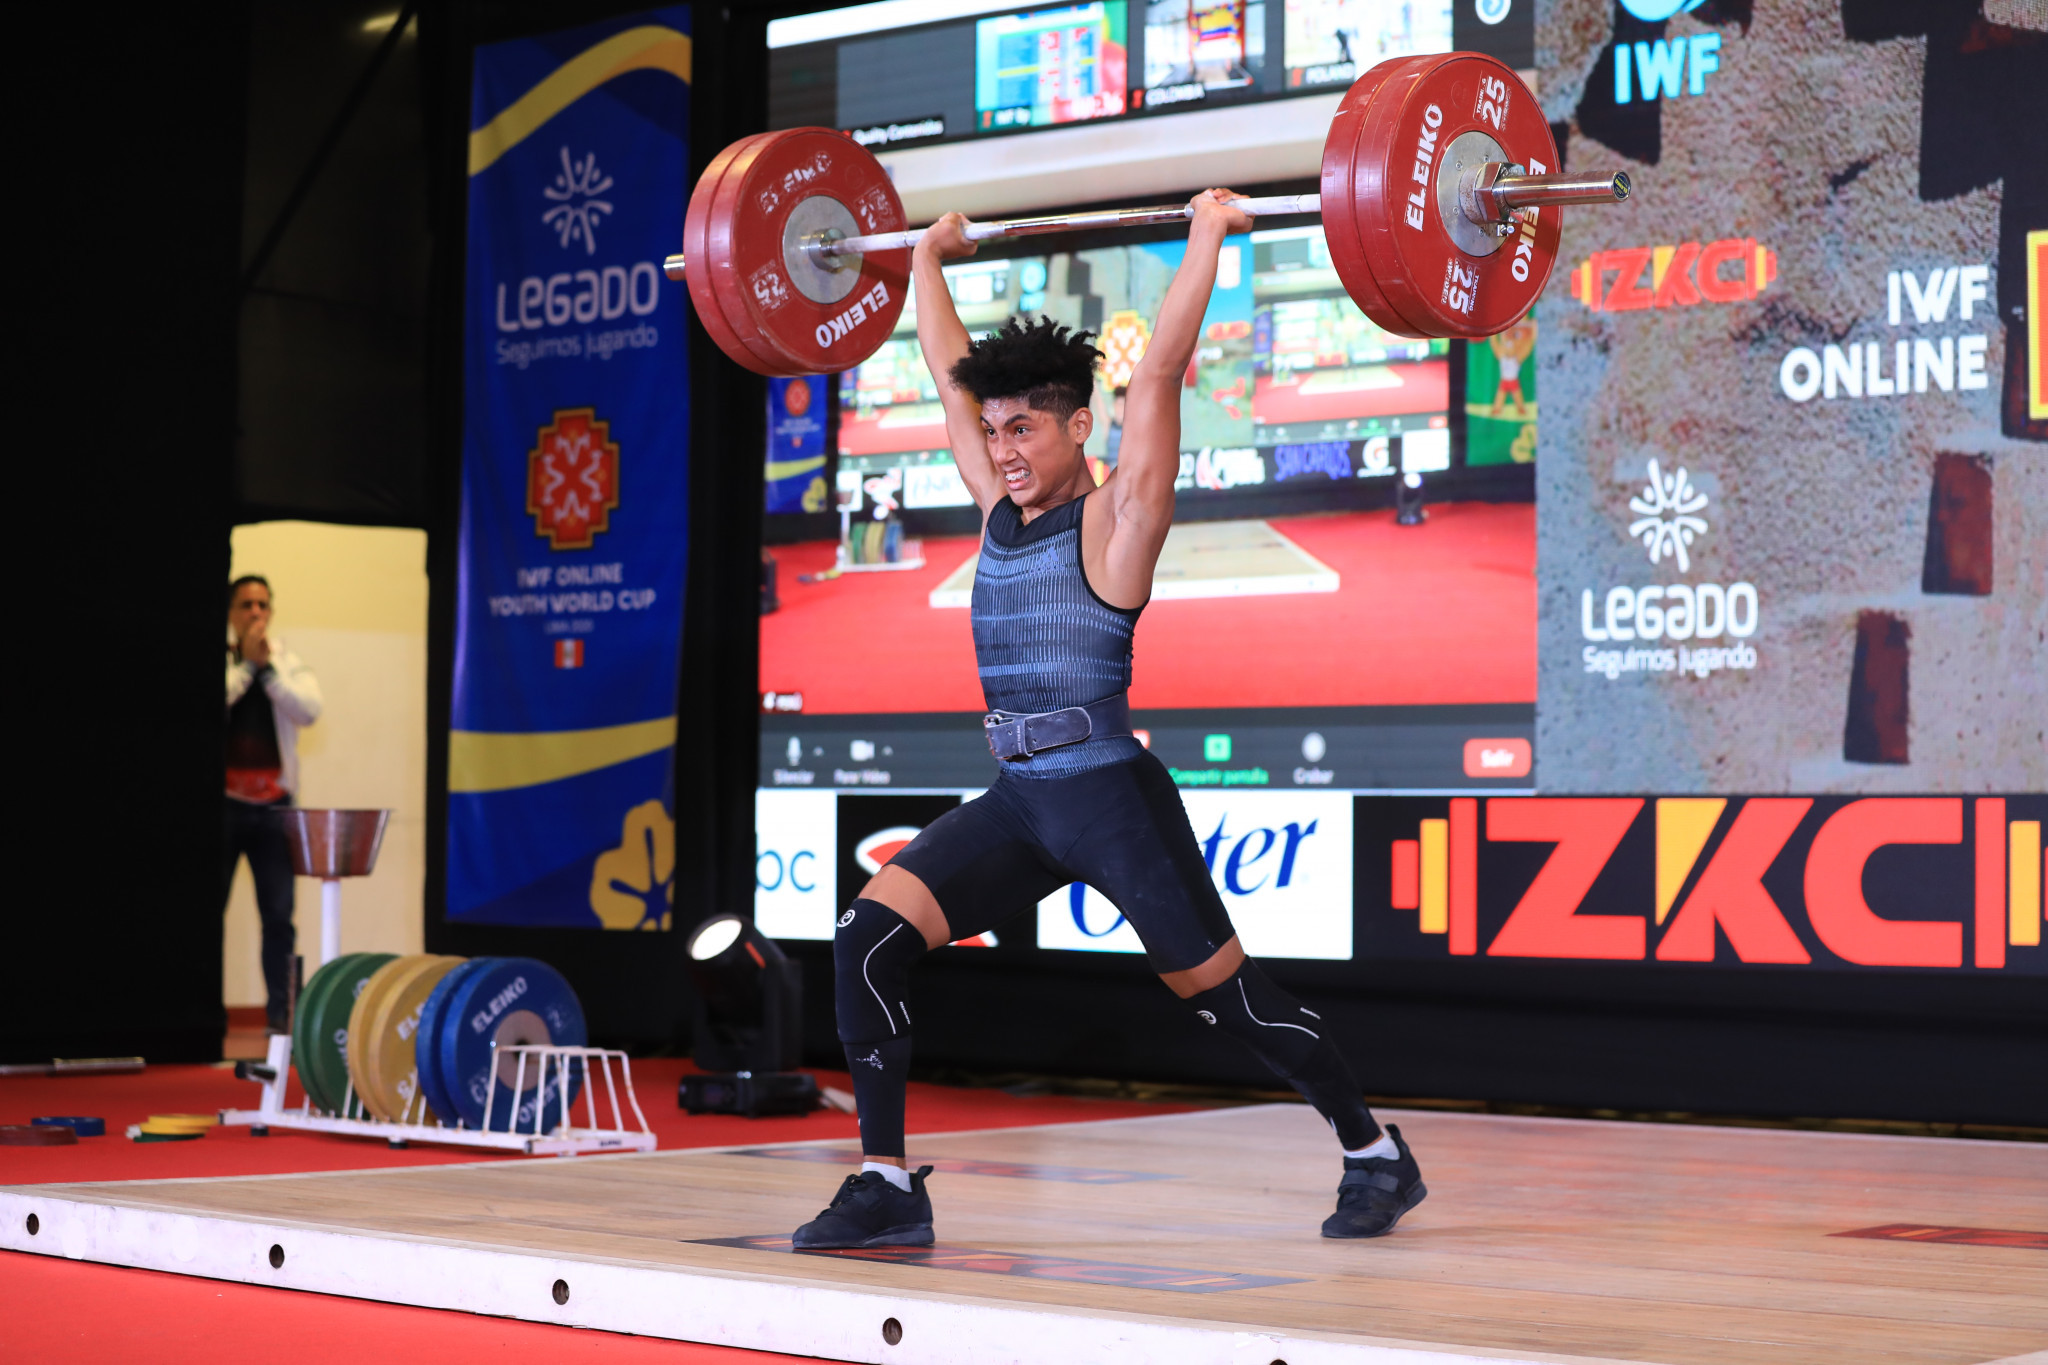 Peru failed to add to their medal tally on day two with some less experienced athletes gaining some experience on the big stage ©Peru Weightlifting